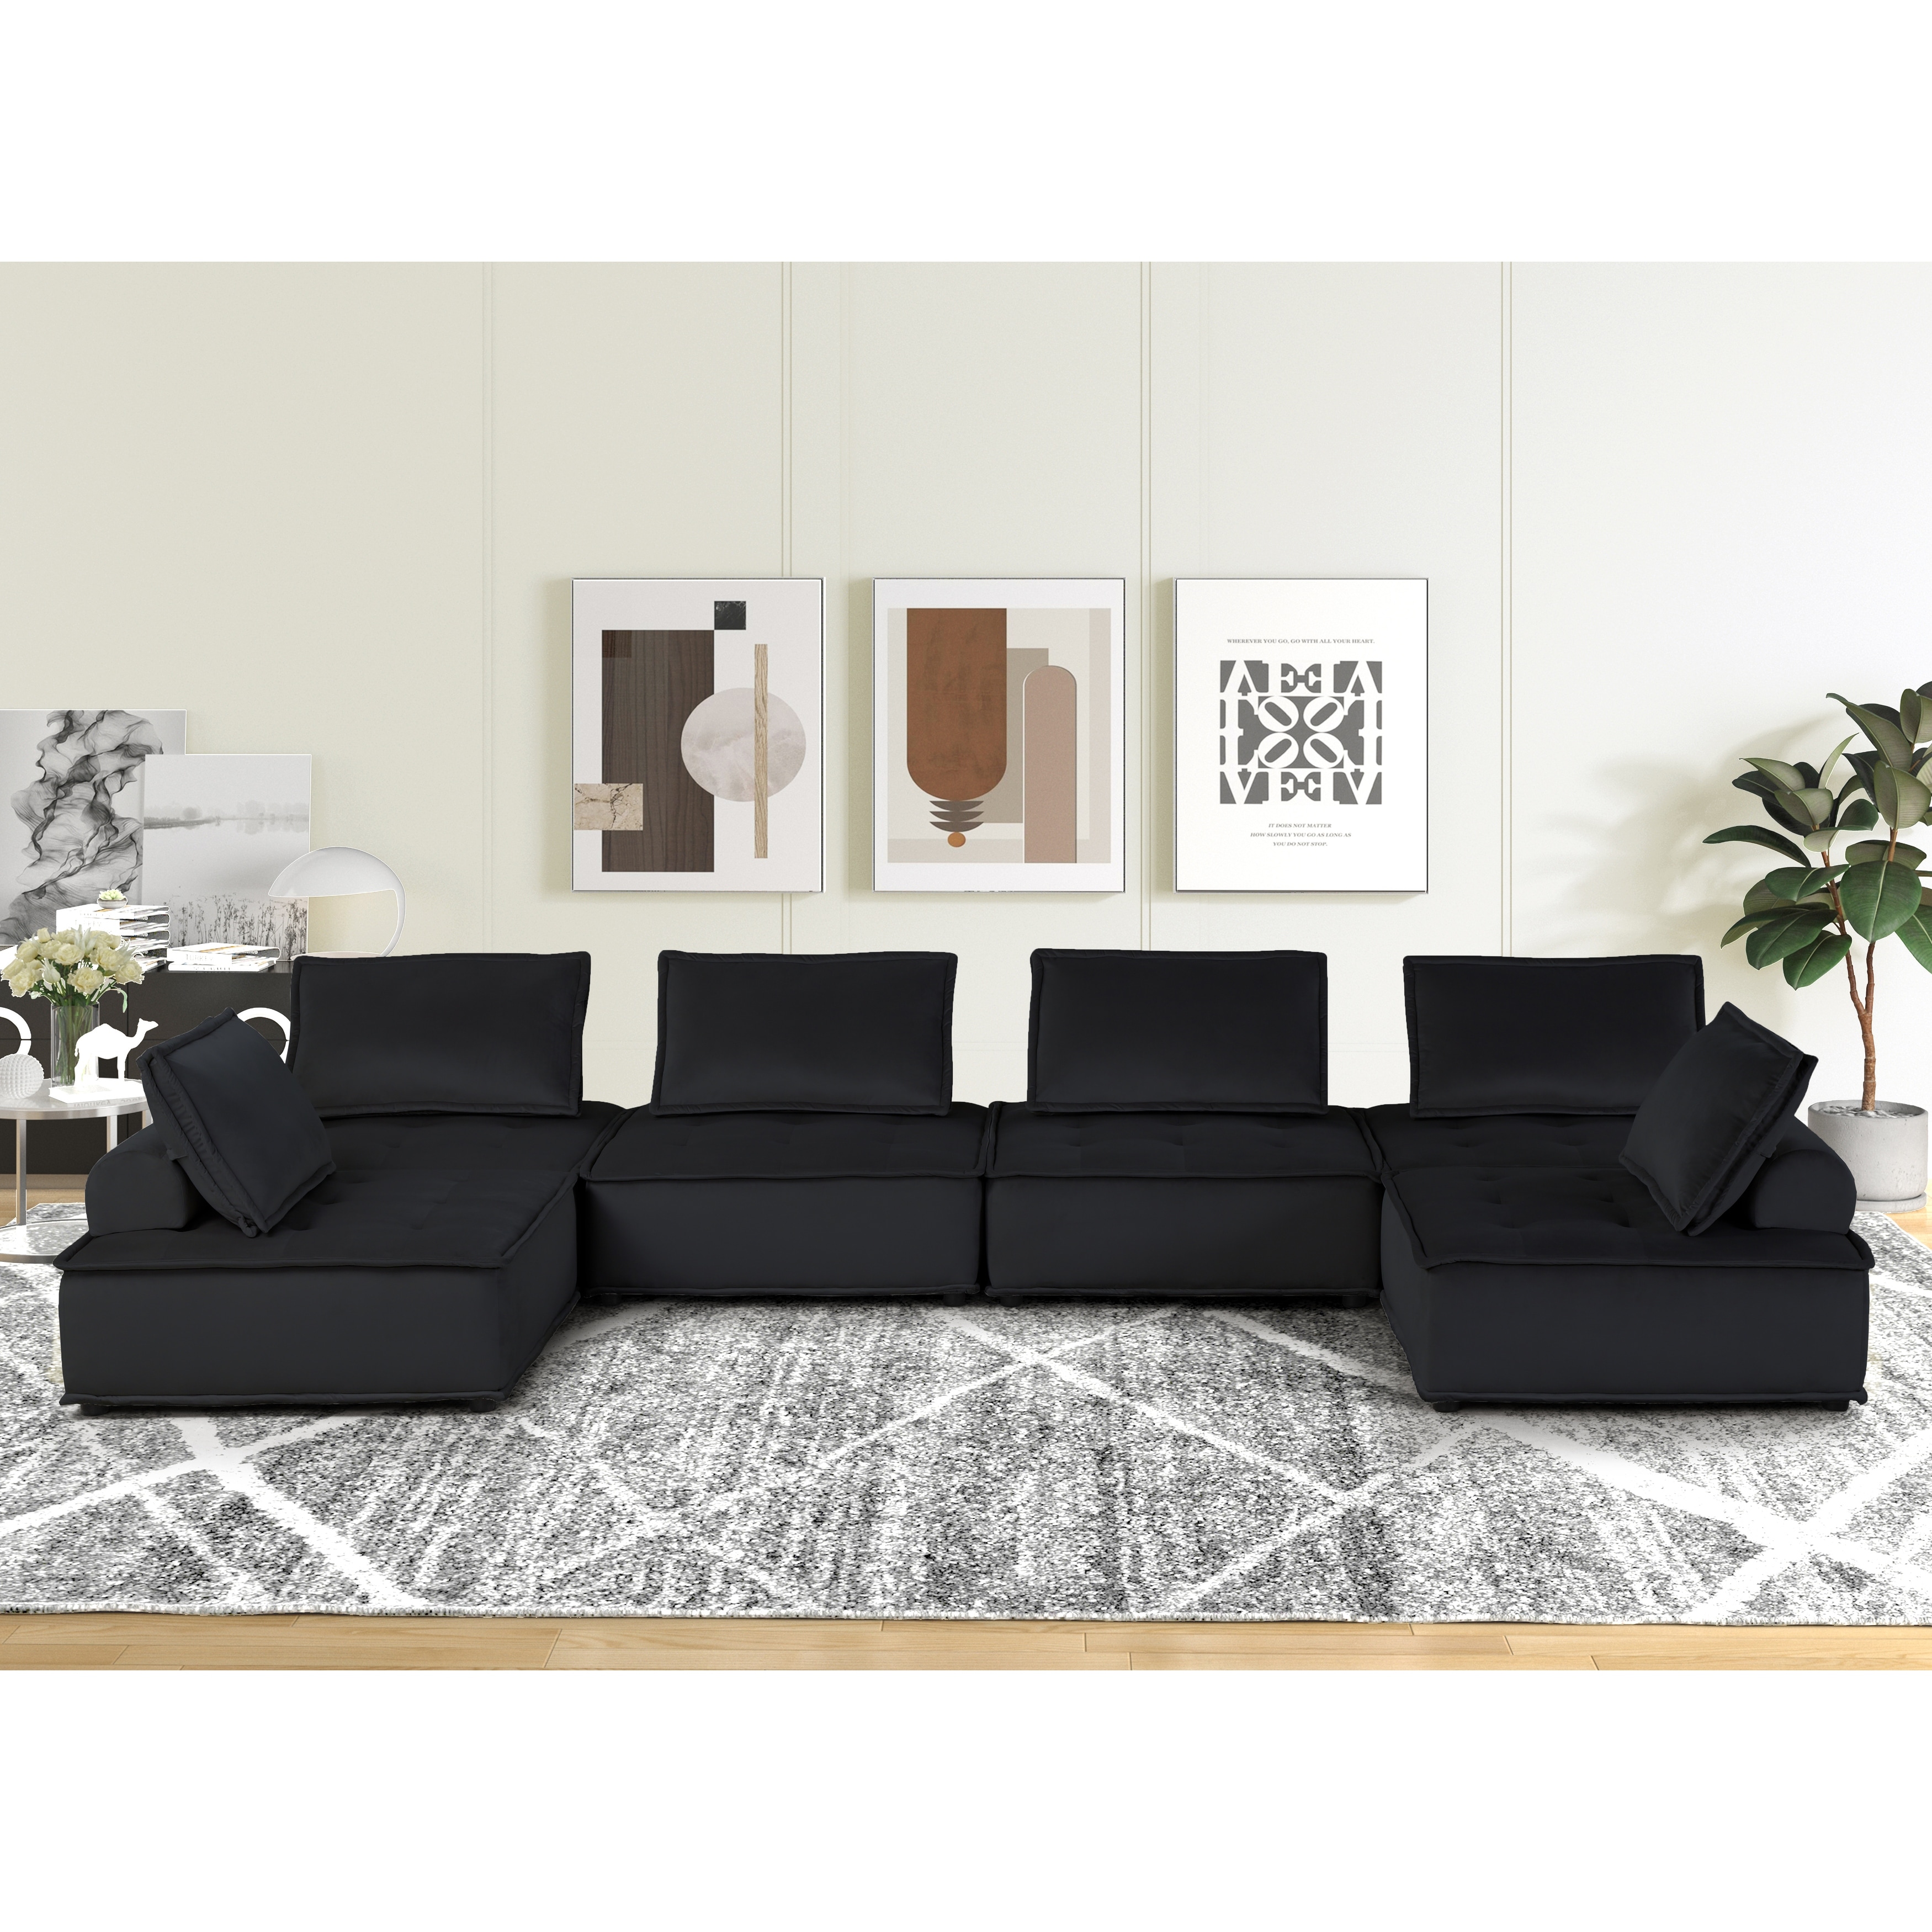 Modern U-shape Modular Sectional Sofa With Tufted Seat  6-seater Removable Back Cushion Couch Living Room Furniture